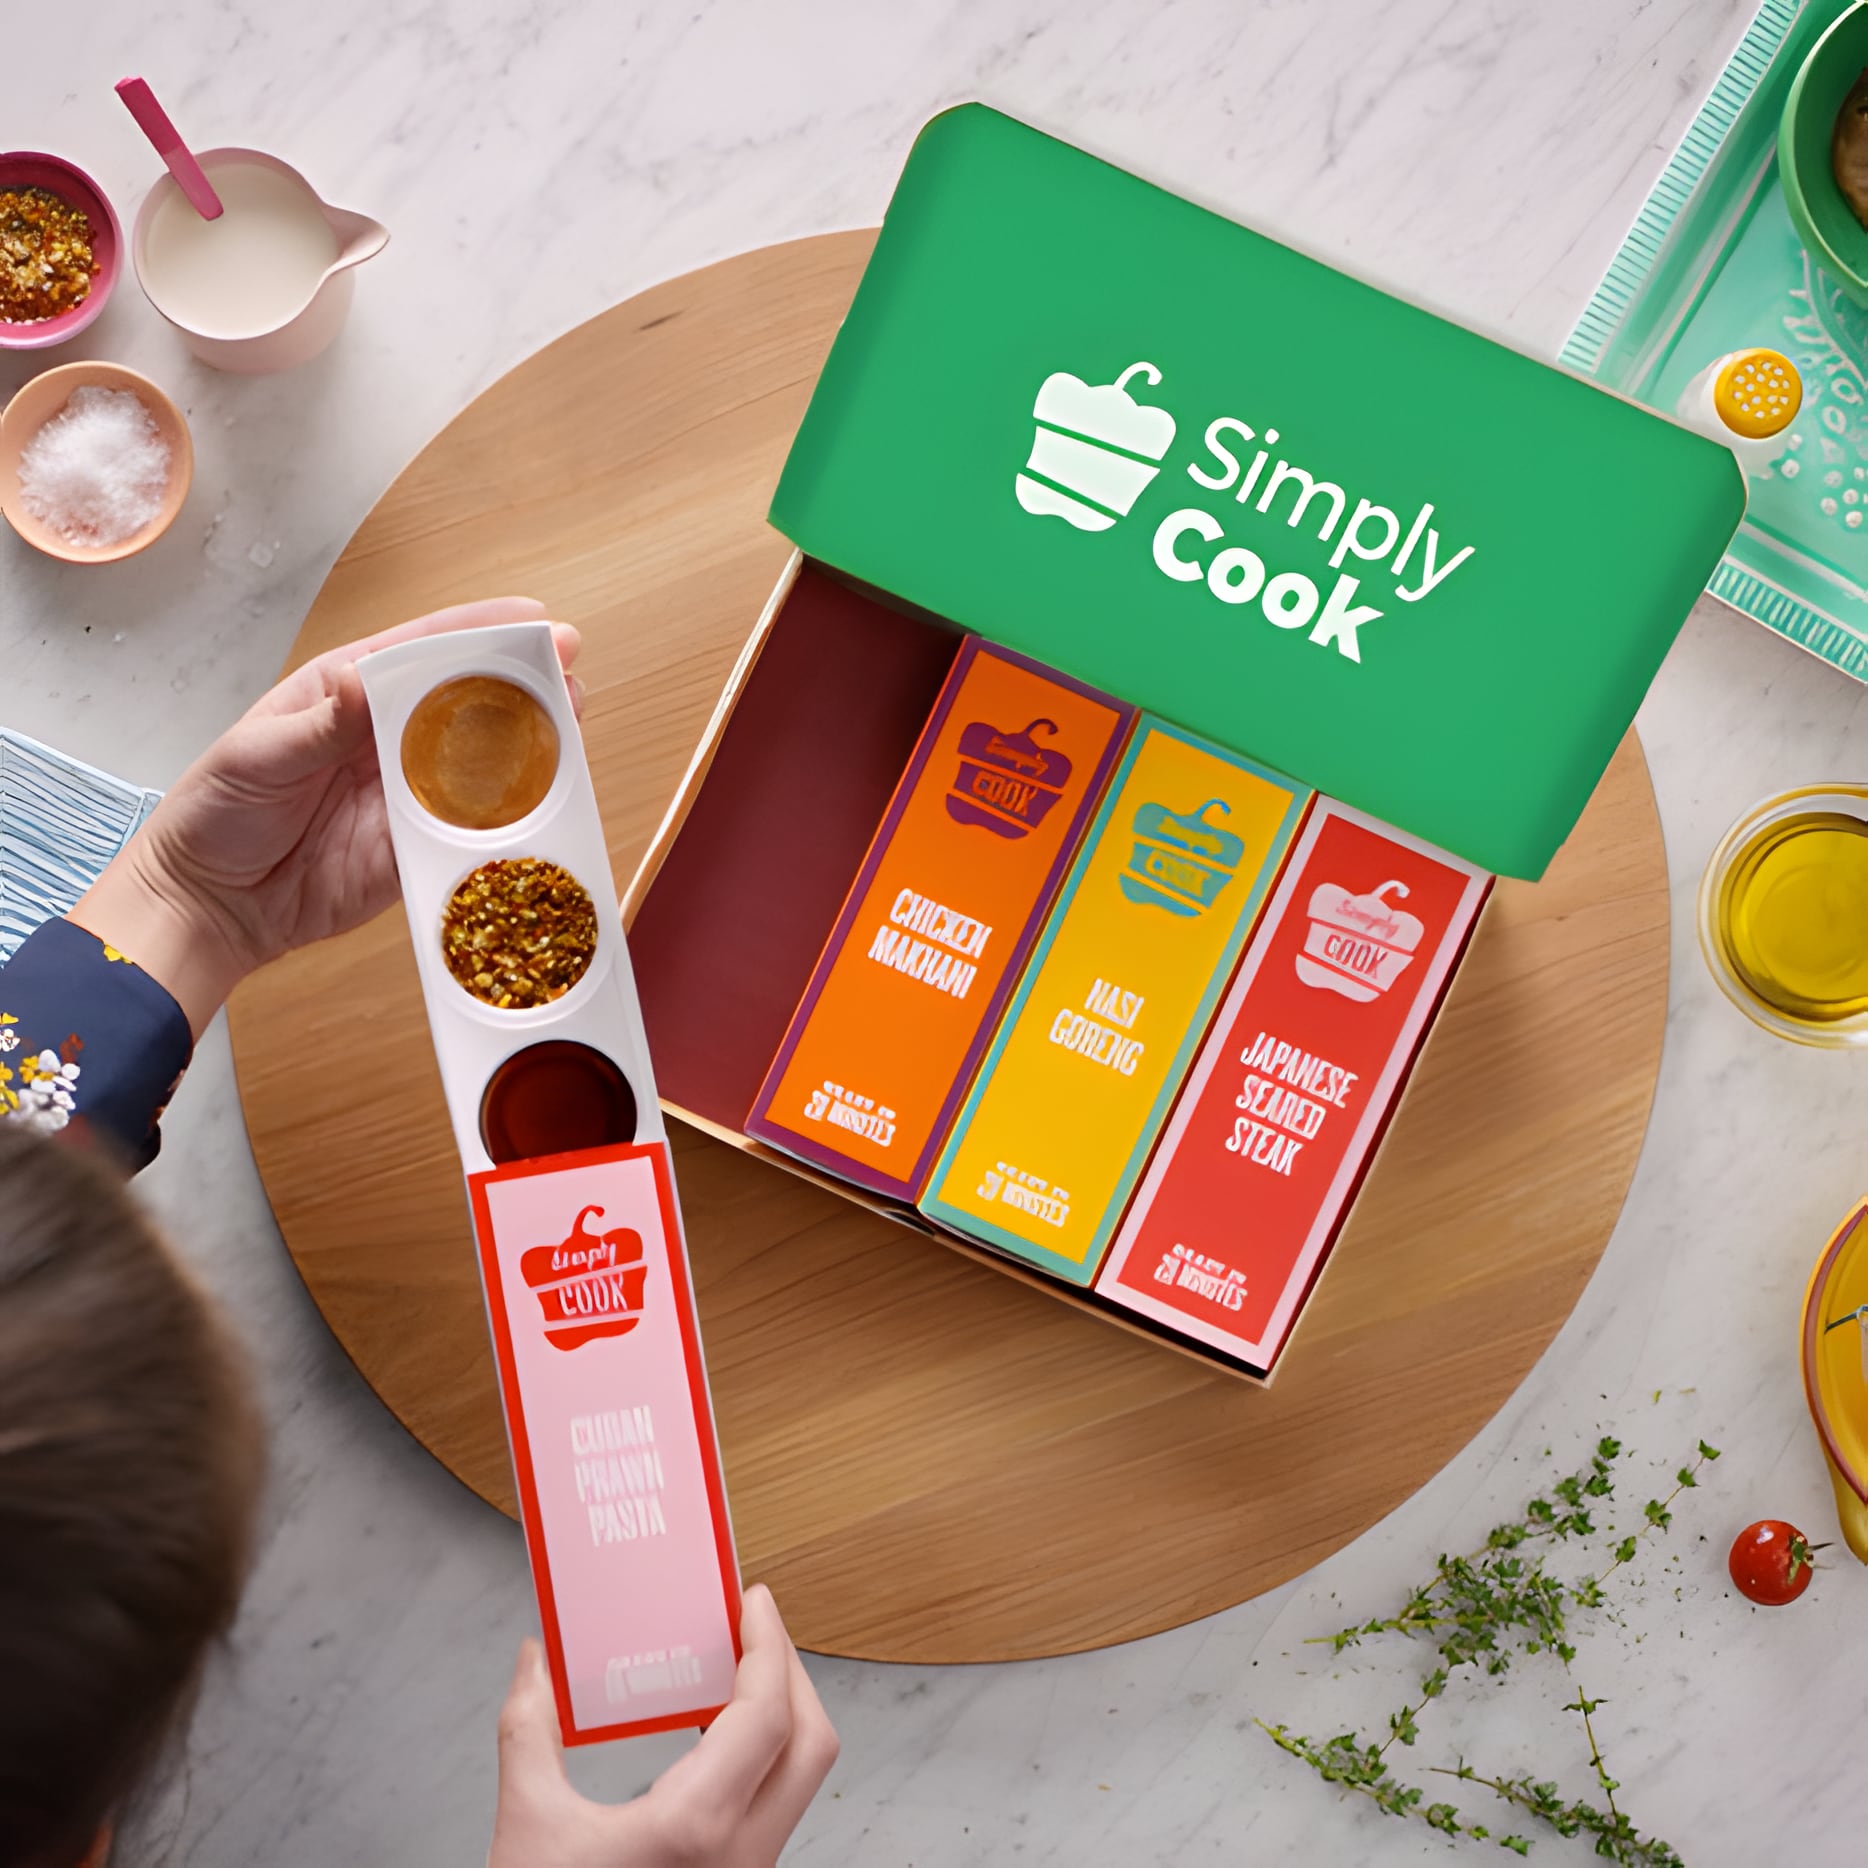 Free Simplycook Cooking Food Box